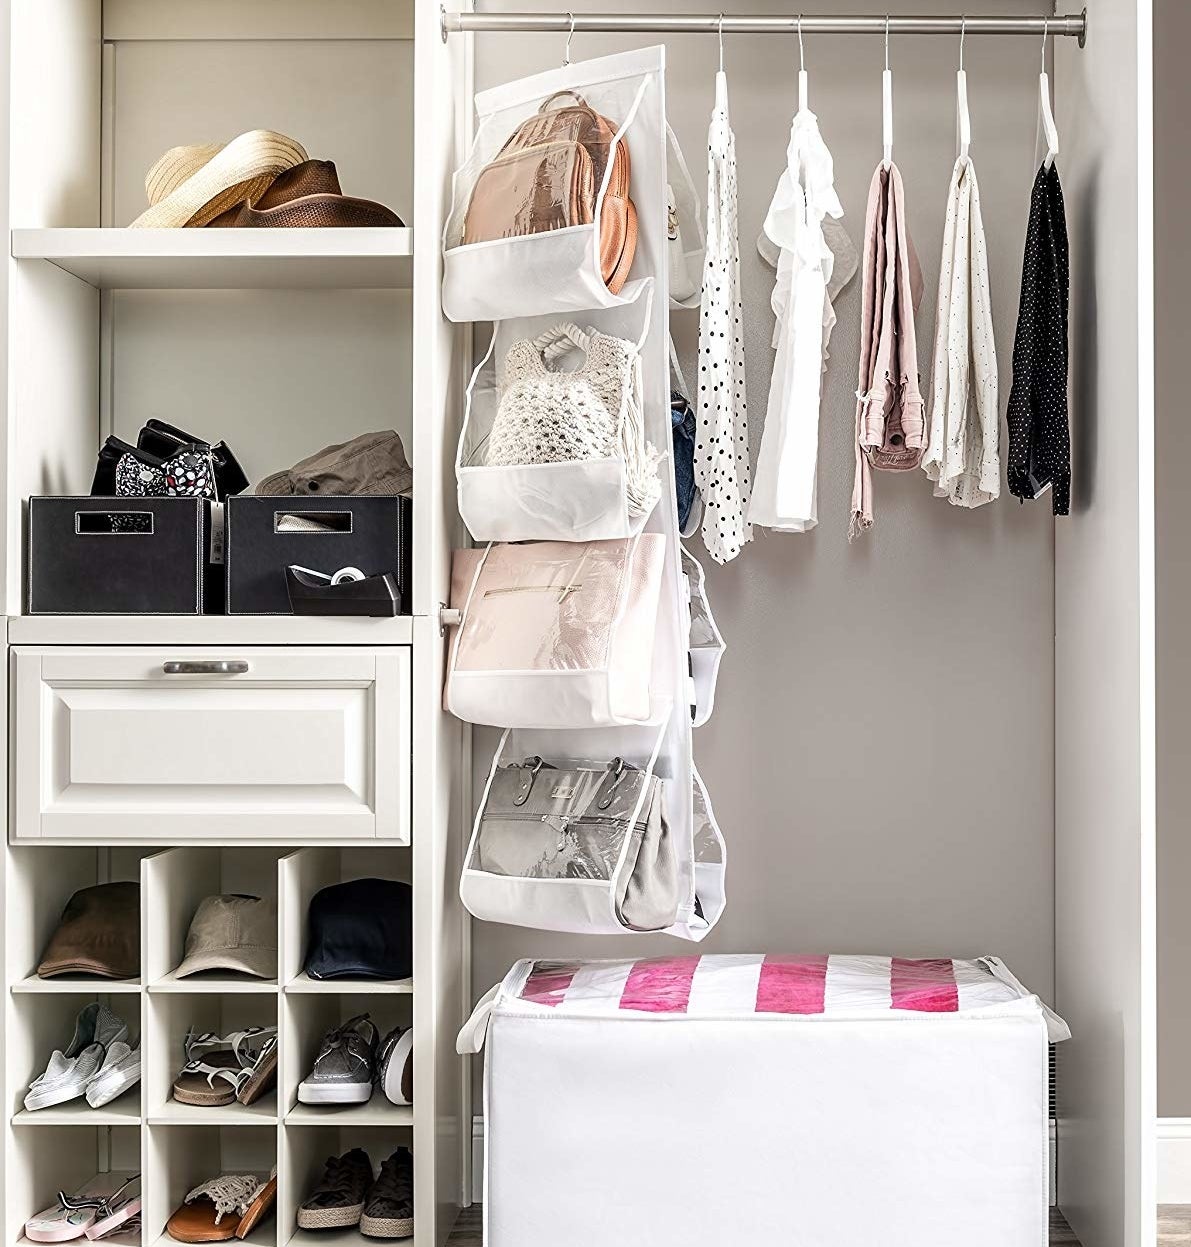 How to Organize a Room With Too Much Stuff